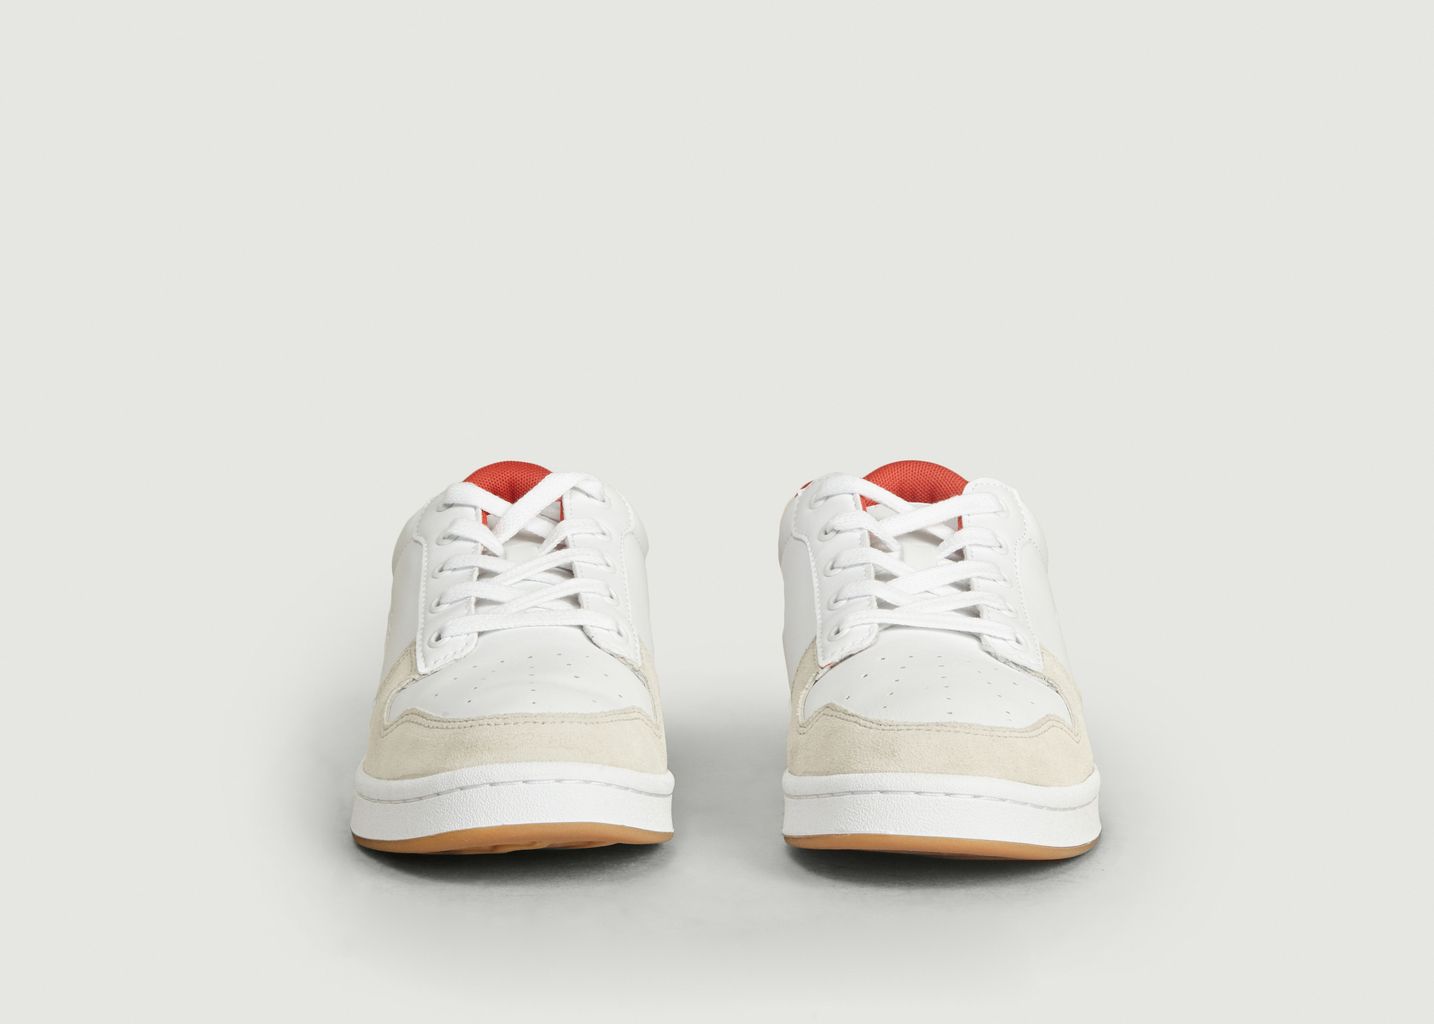 Sneakers Master Cup - Lacoste